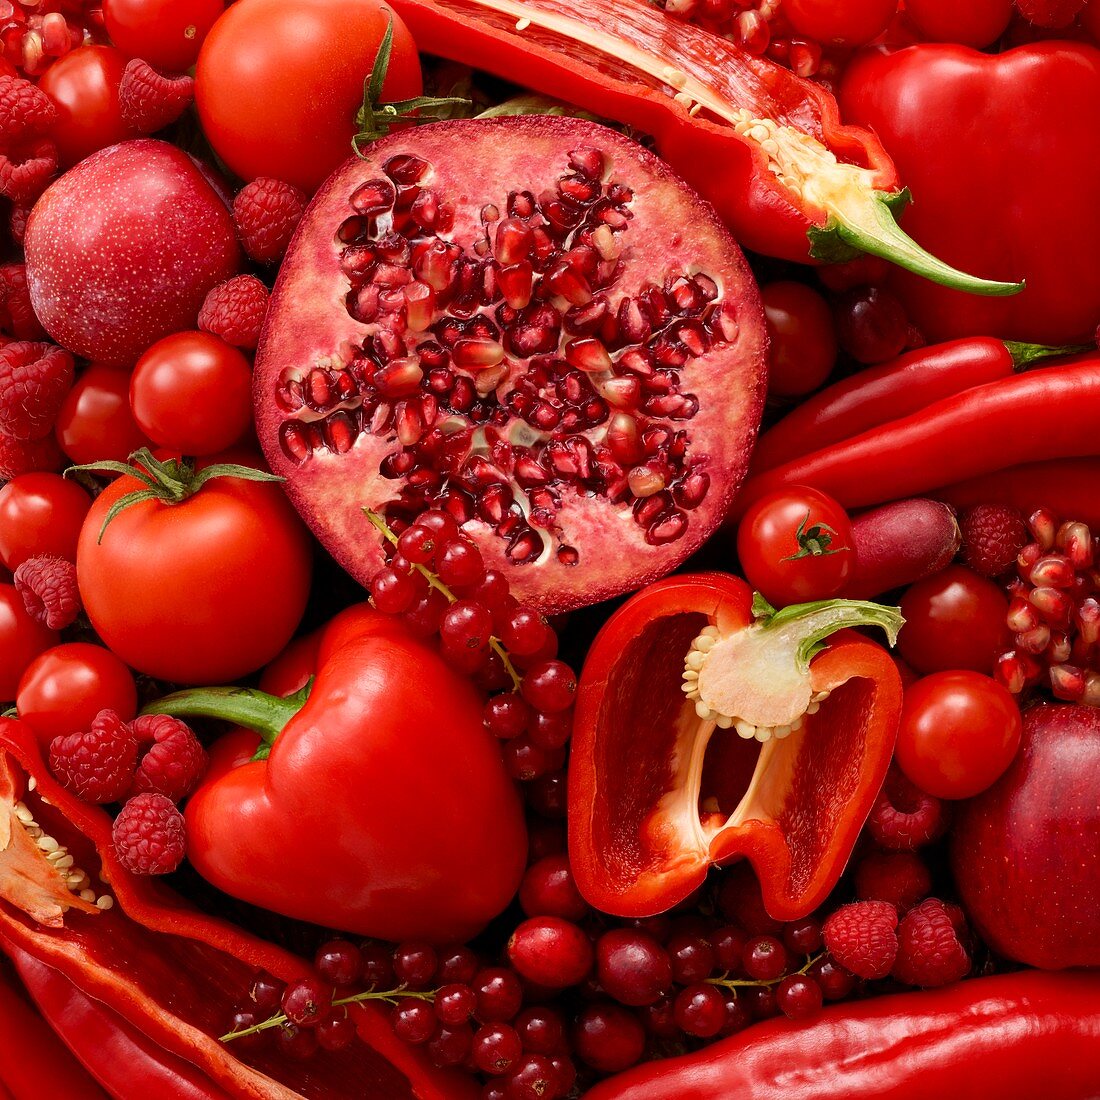 Fresh red produce